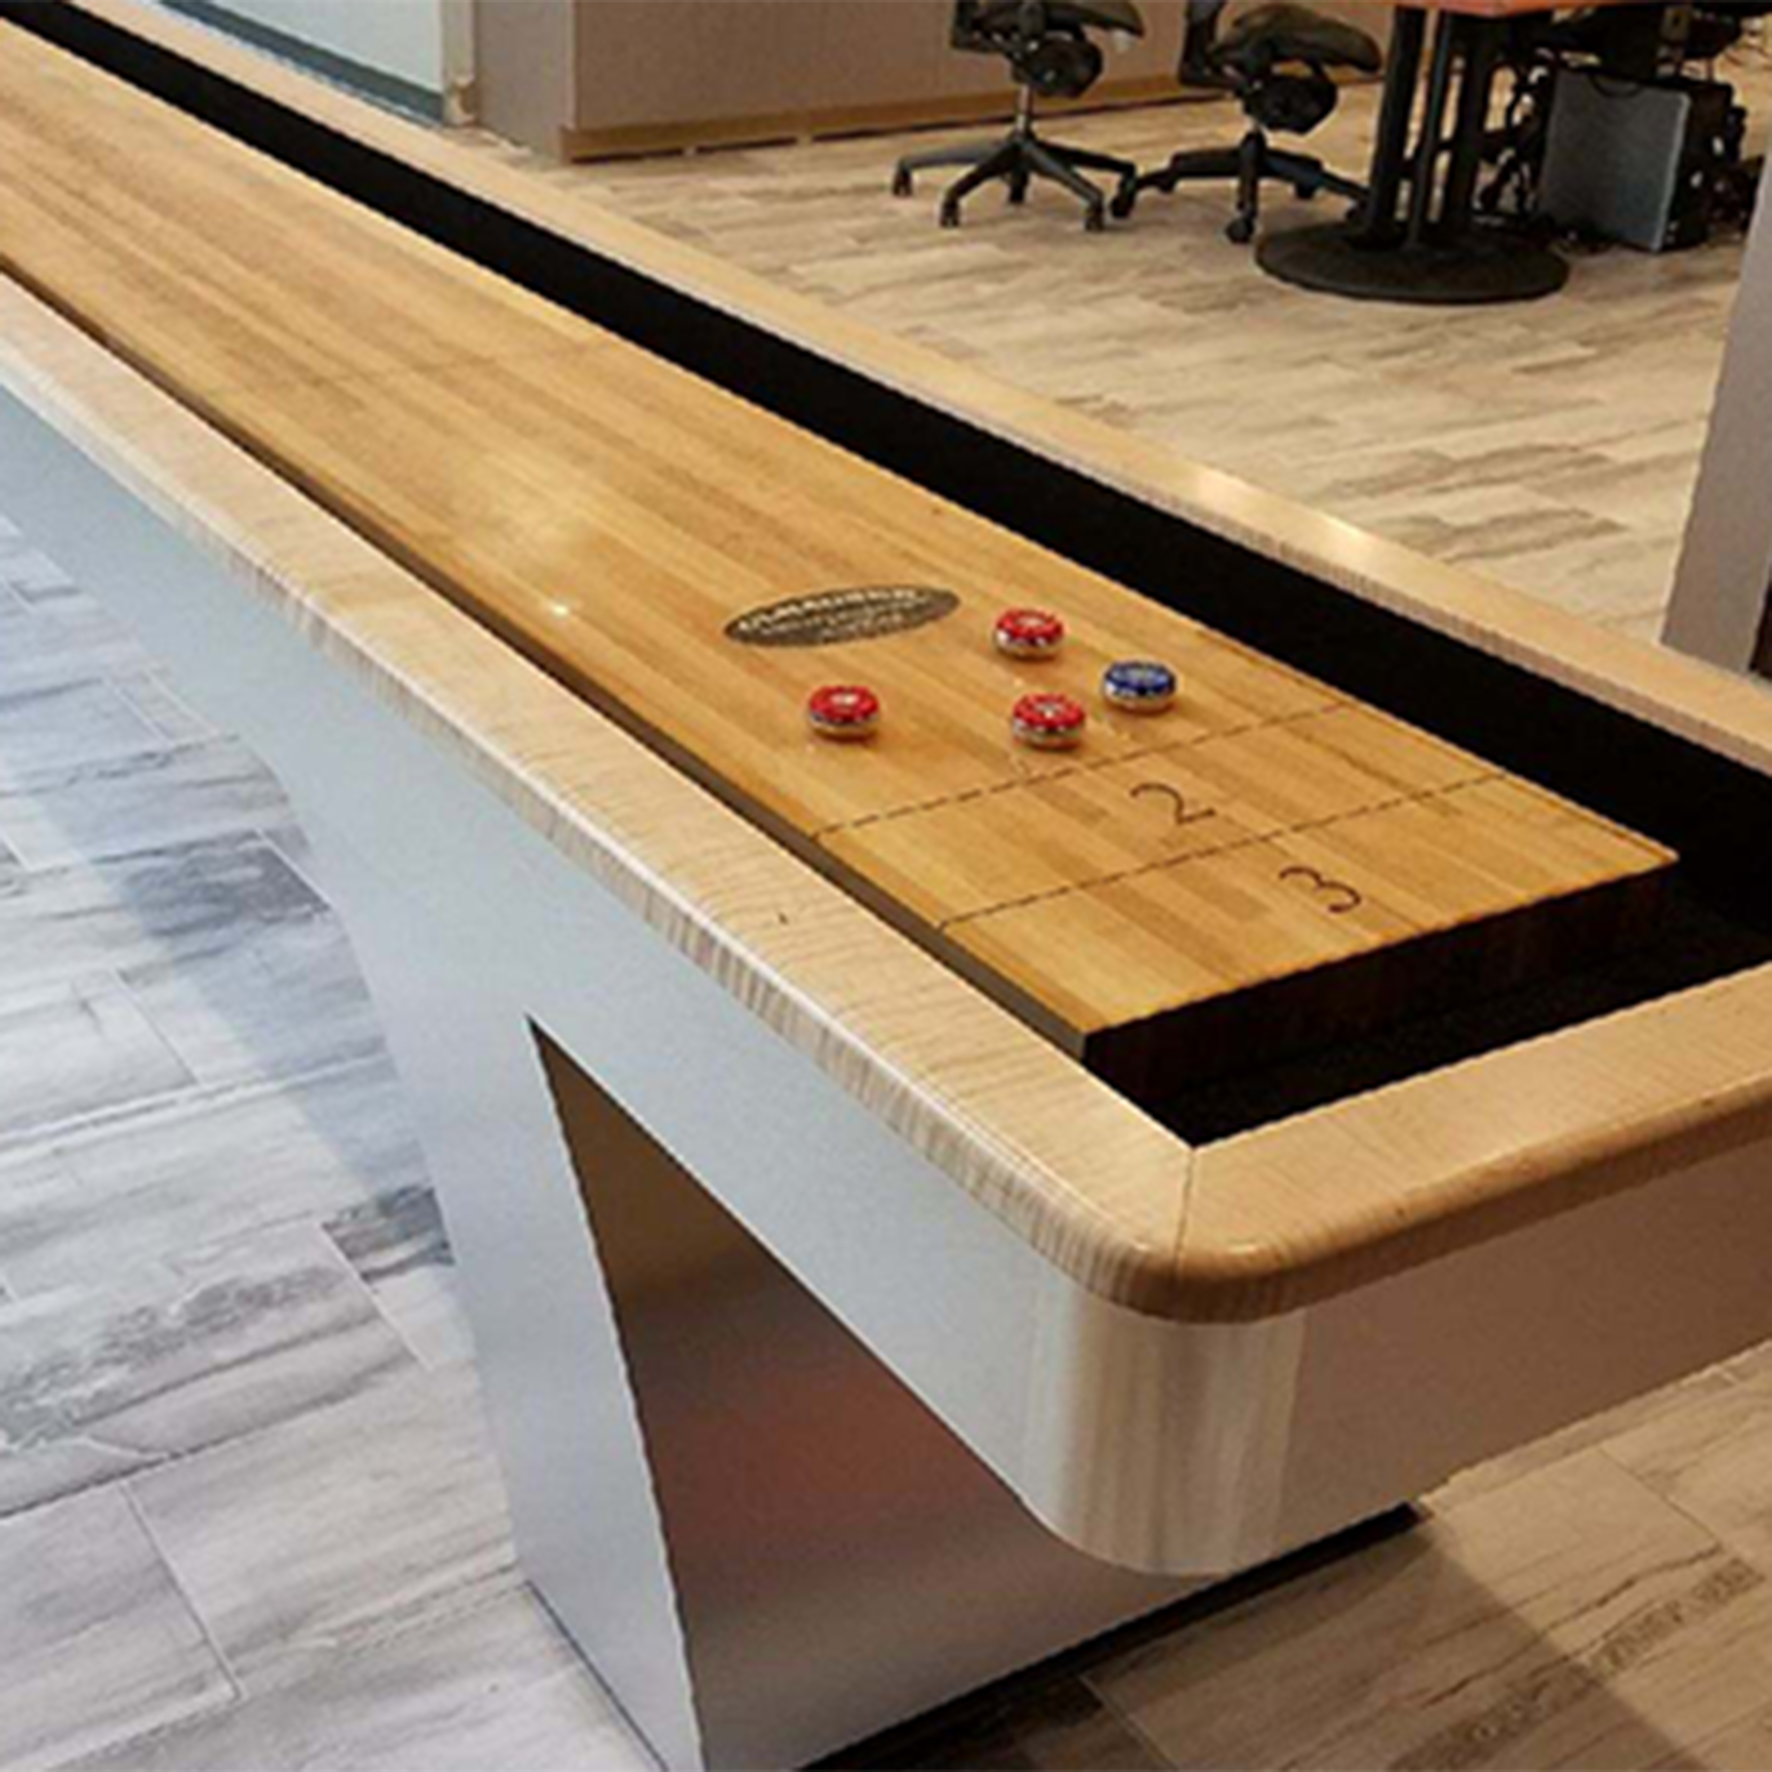 Waterfall hand-crafted Shuffleboard by Olhausen